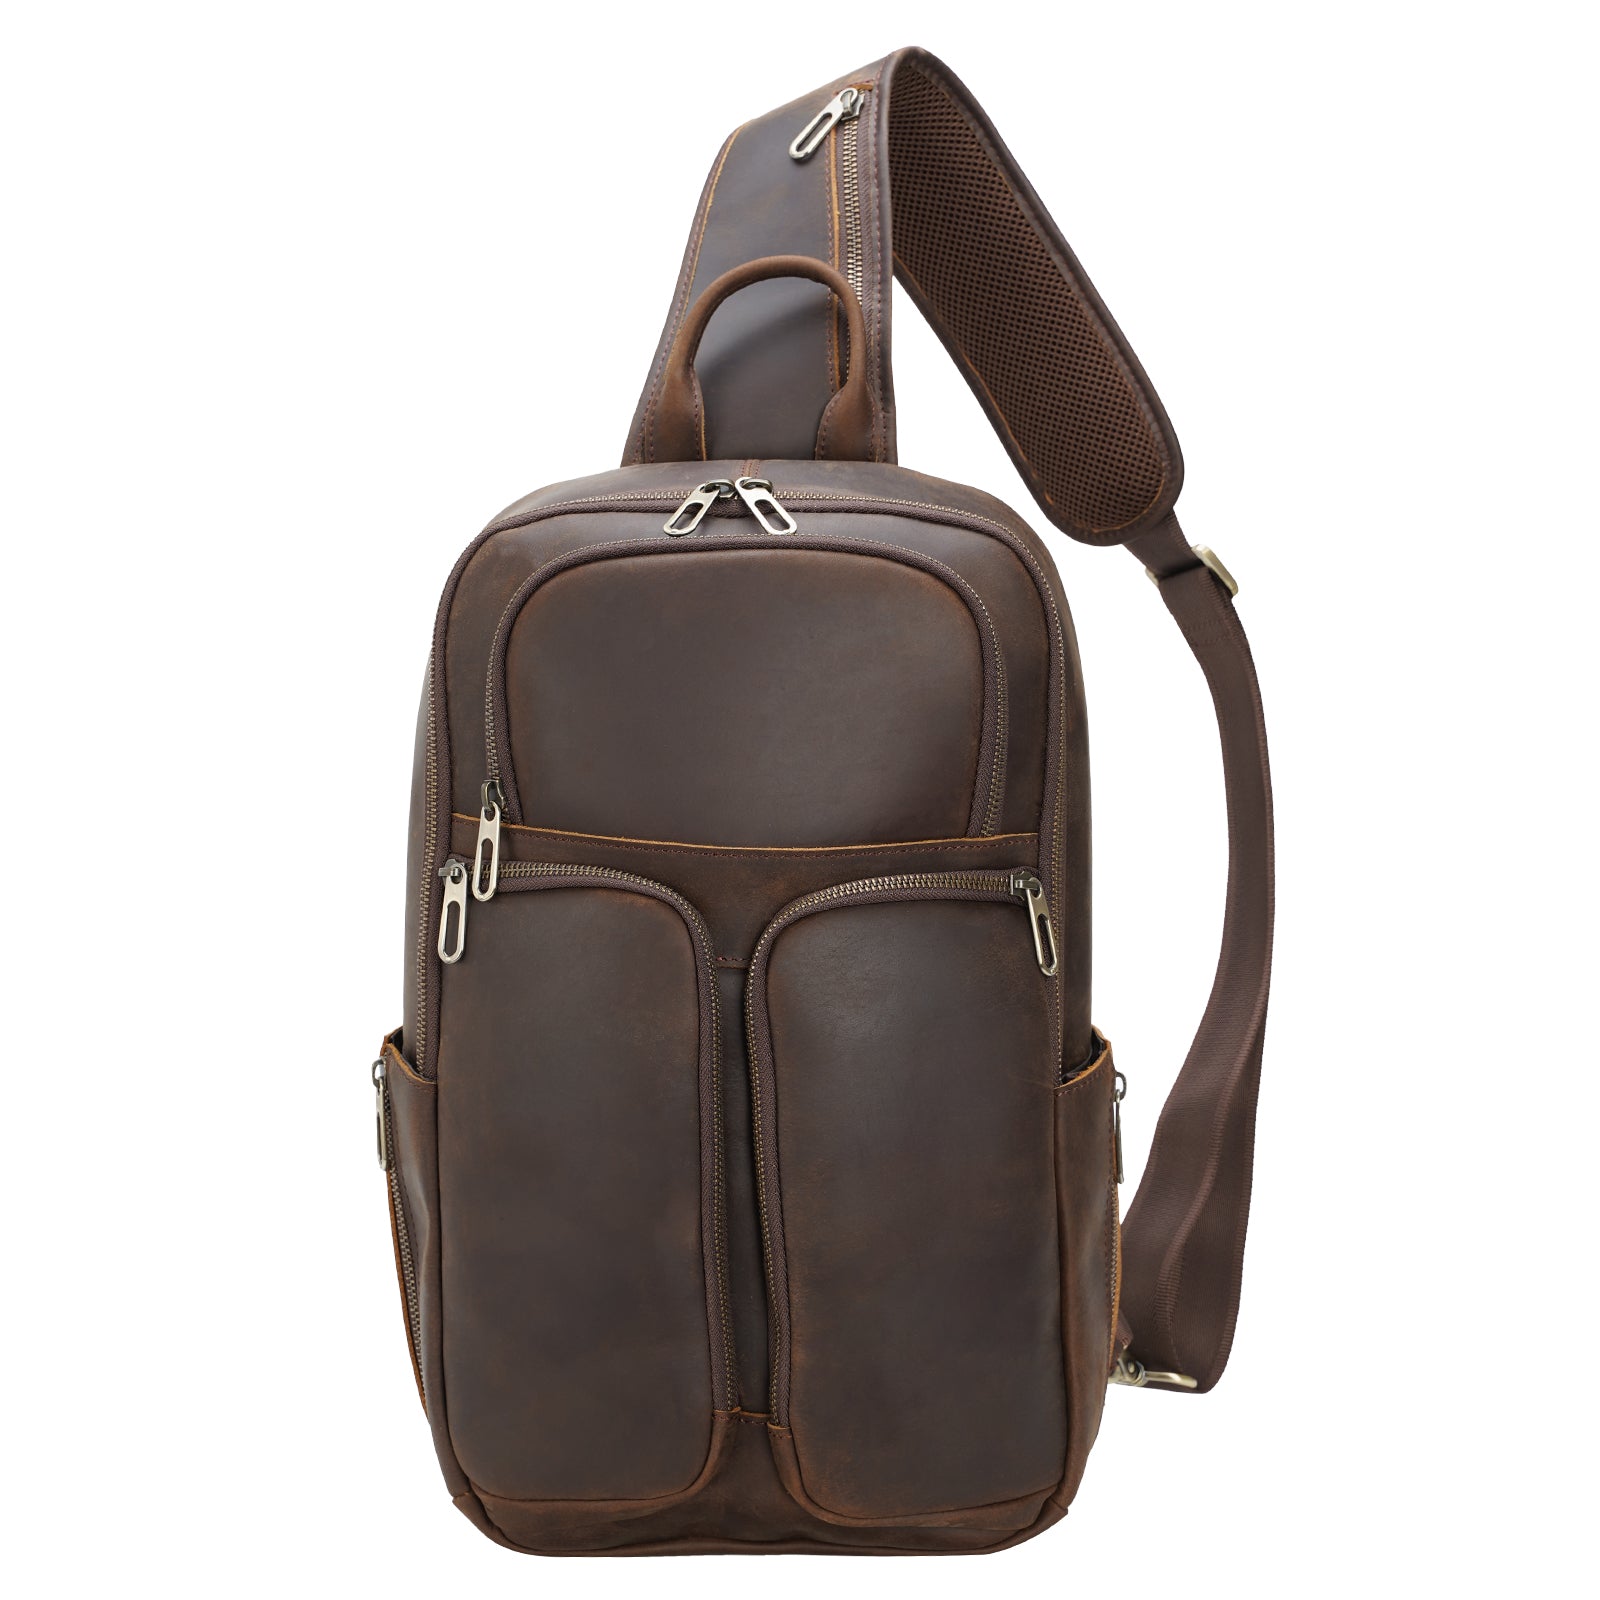 Polare Cowhide Leather Waterproof Casual Daypack Sling Shoulder Chest